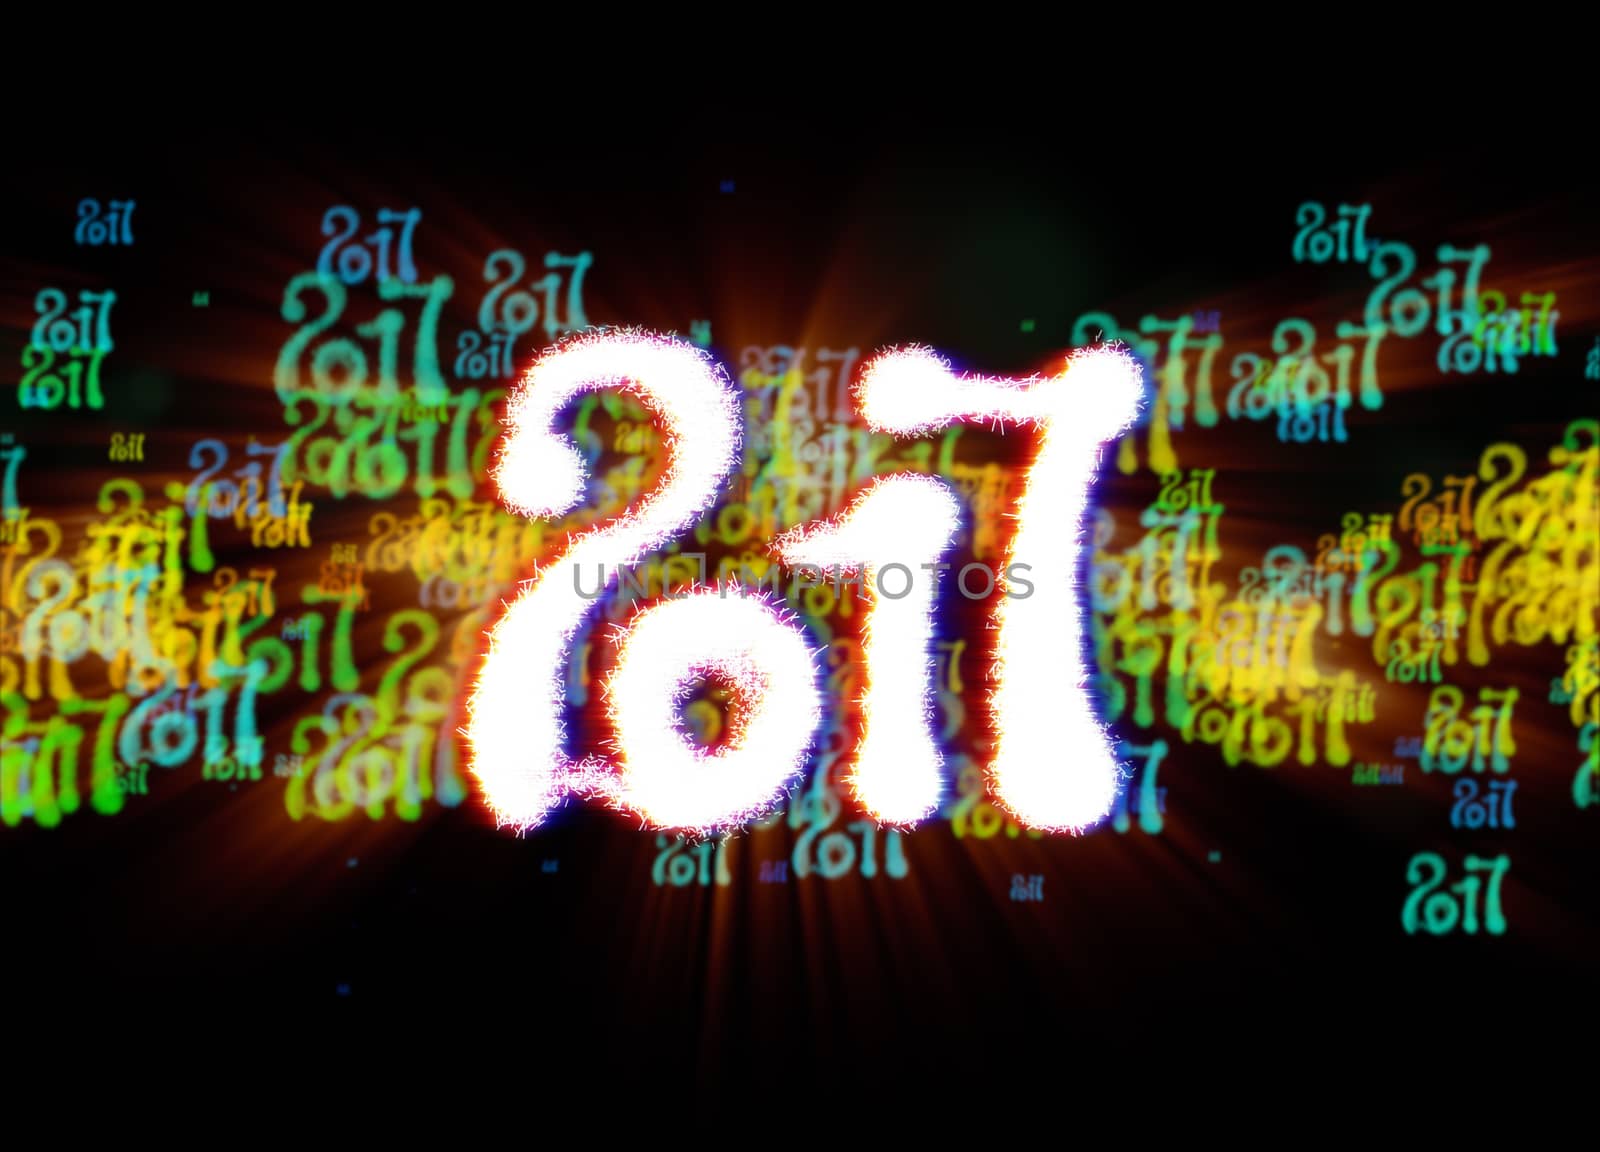 Happy new year 2017 isolated numbers written with light on bright bokeh background full of flying digits 3d illustration.